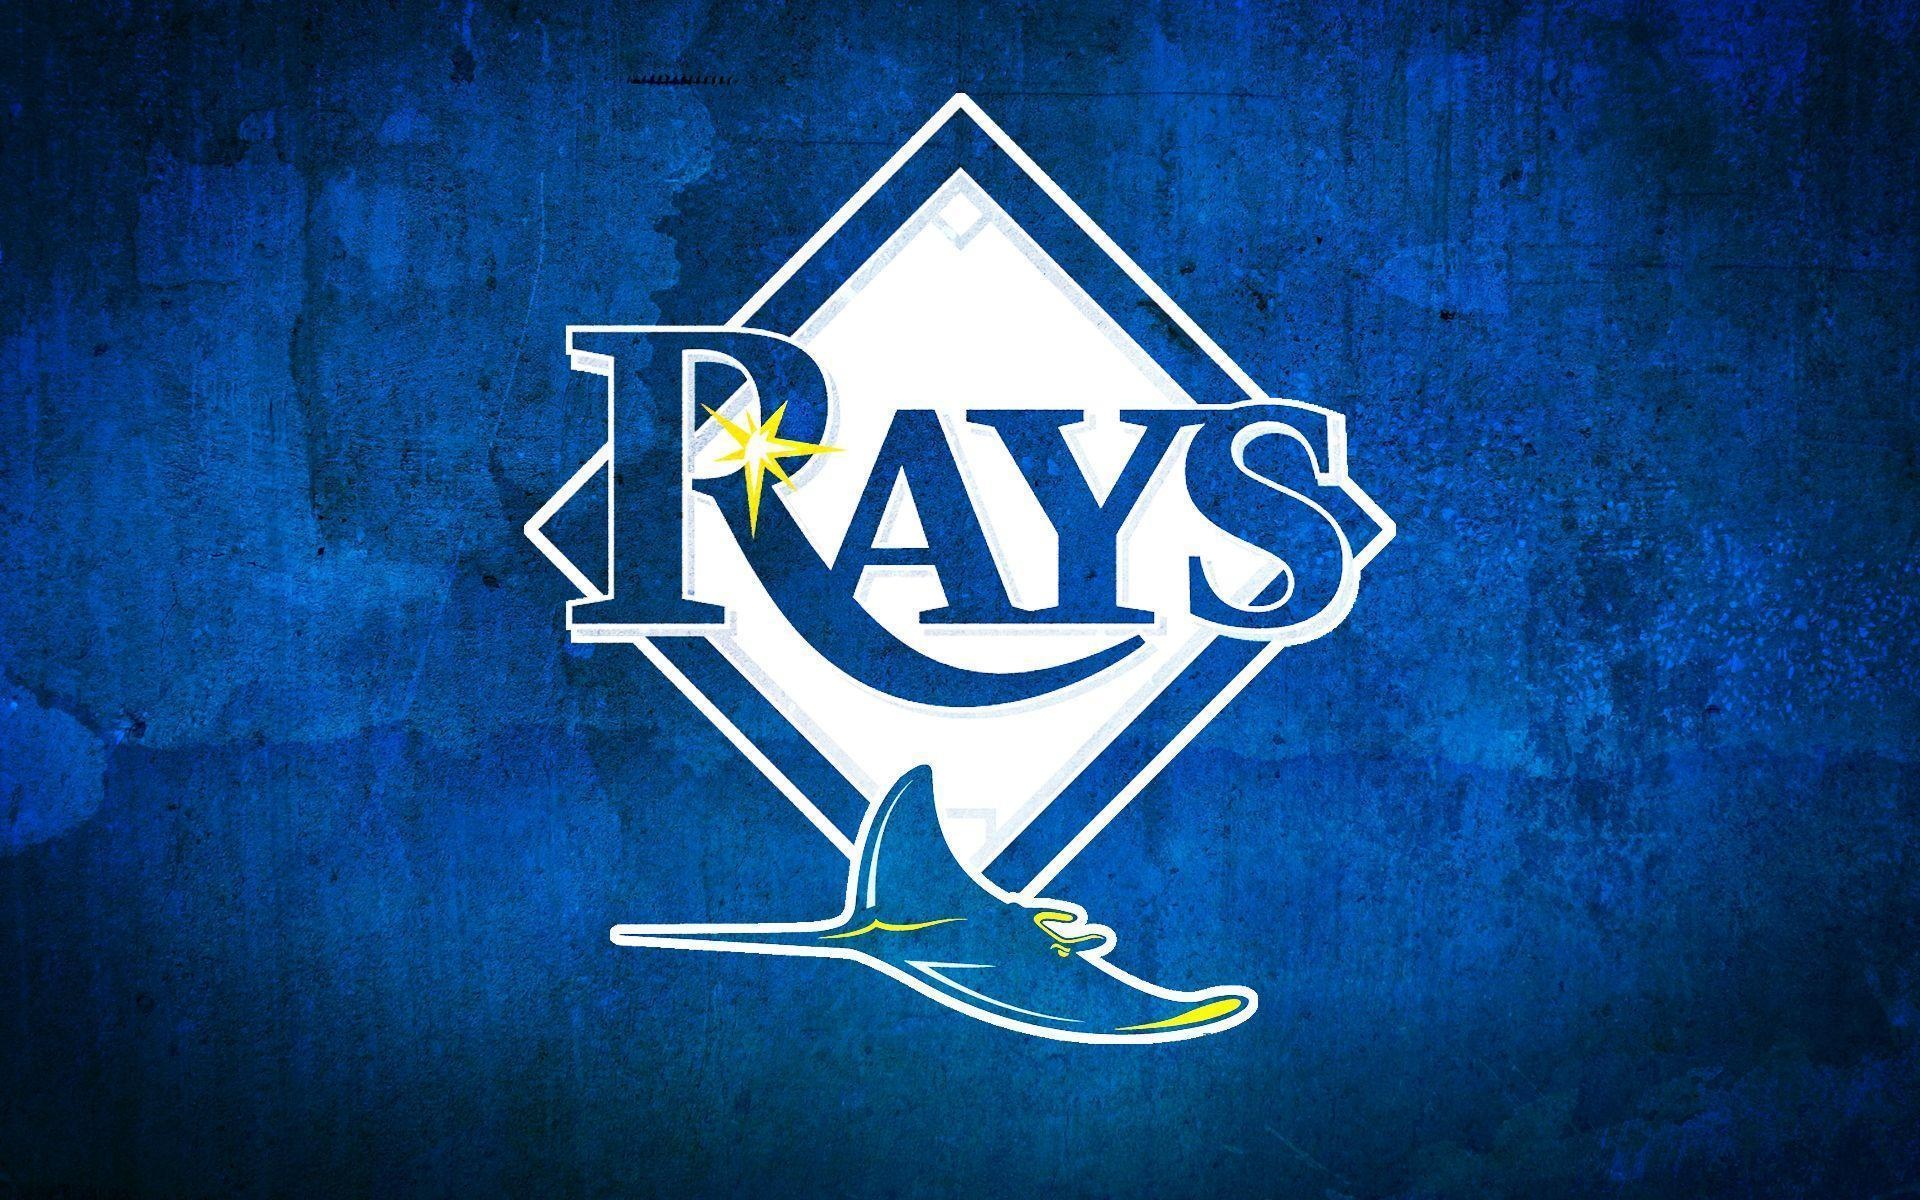 Tampa Bay Rays, Fan wallpapers, Background images, Team support, 1920x1200 HD Desktop